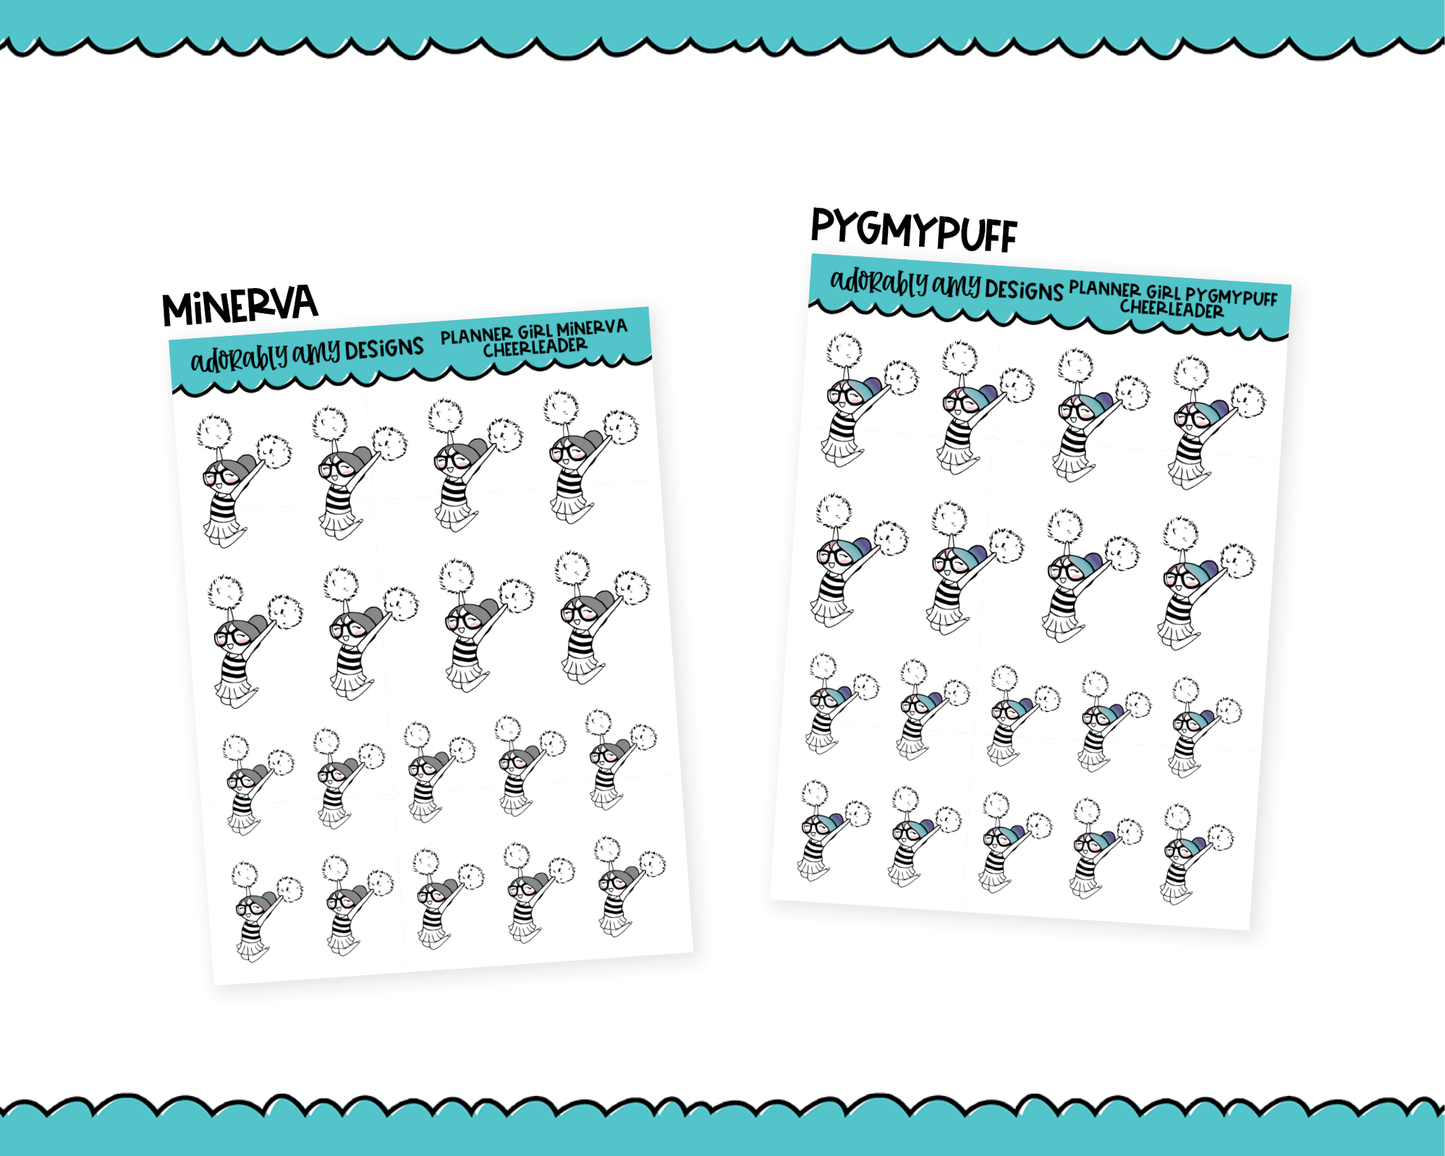 Doodled Planner Girls Character Stickers Cheerleading Decoration Planner Stickers for any Planner or Insert